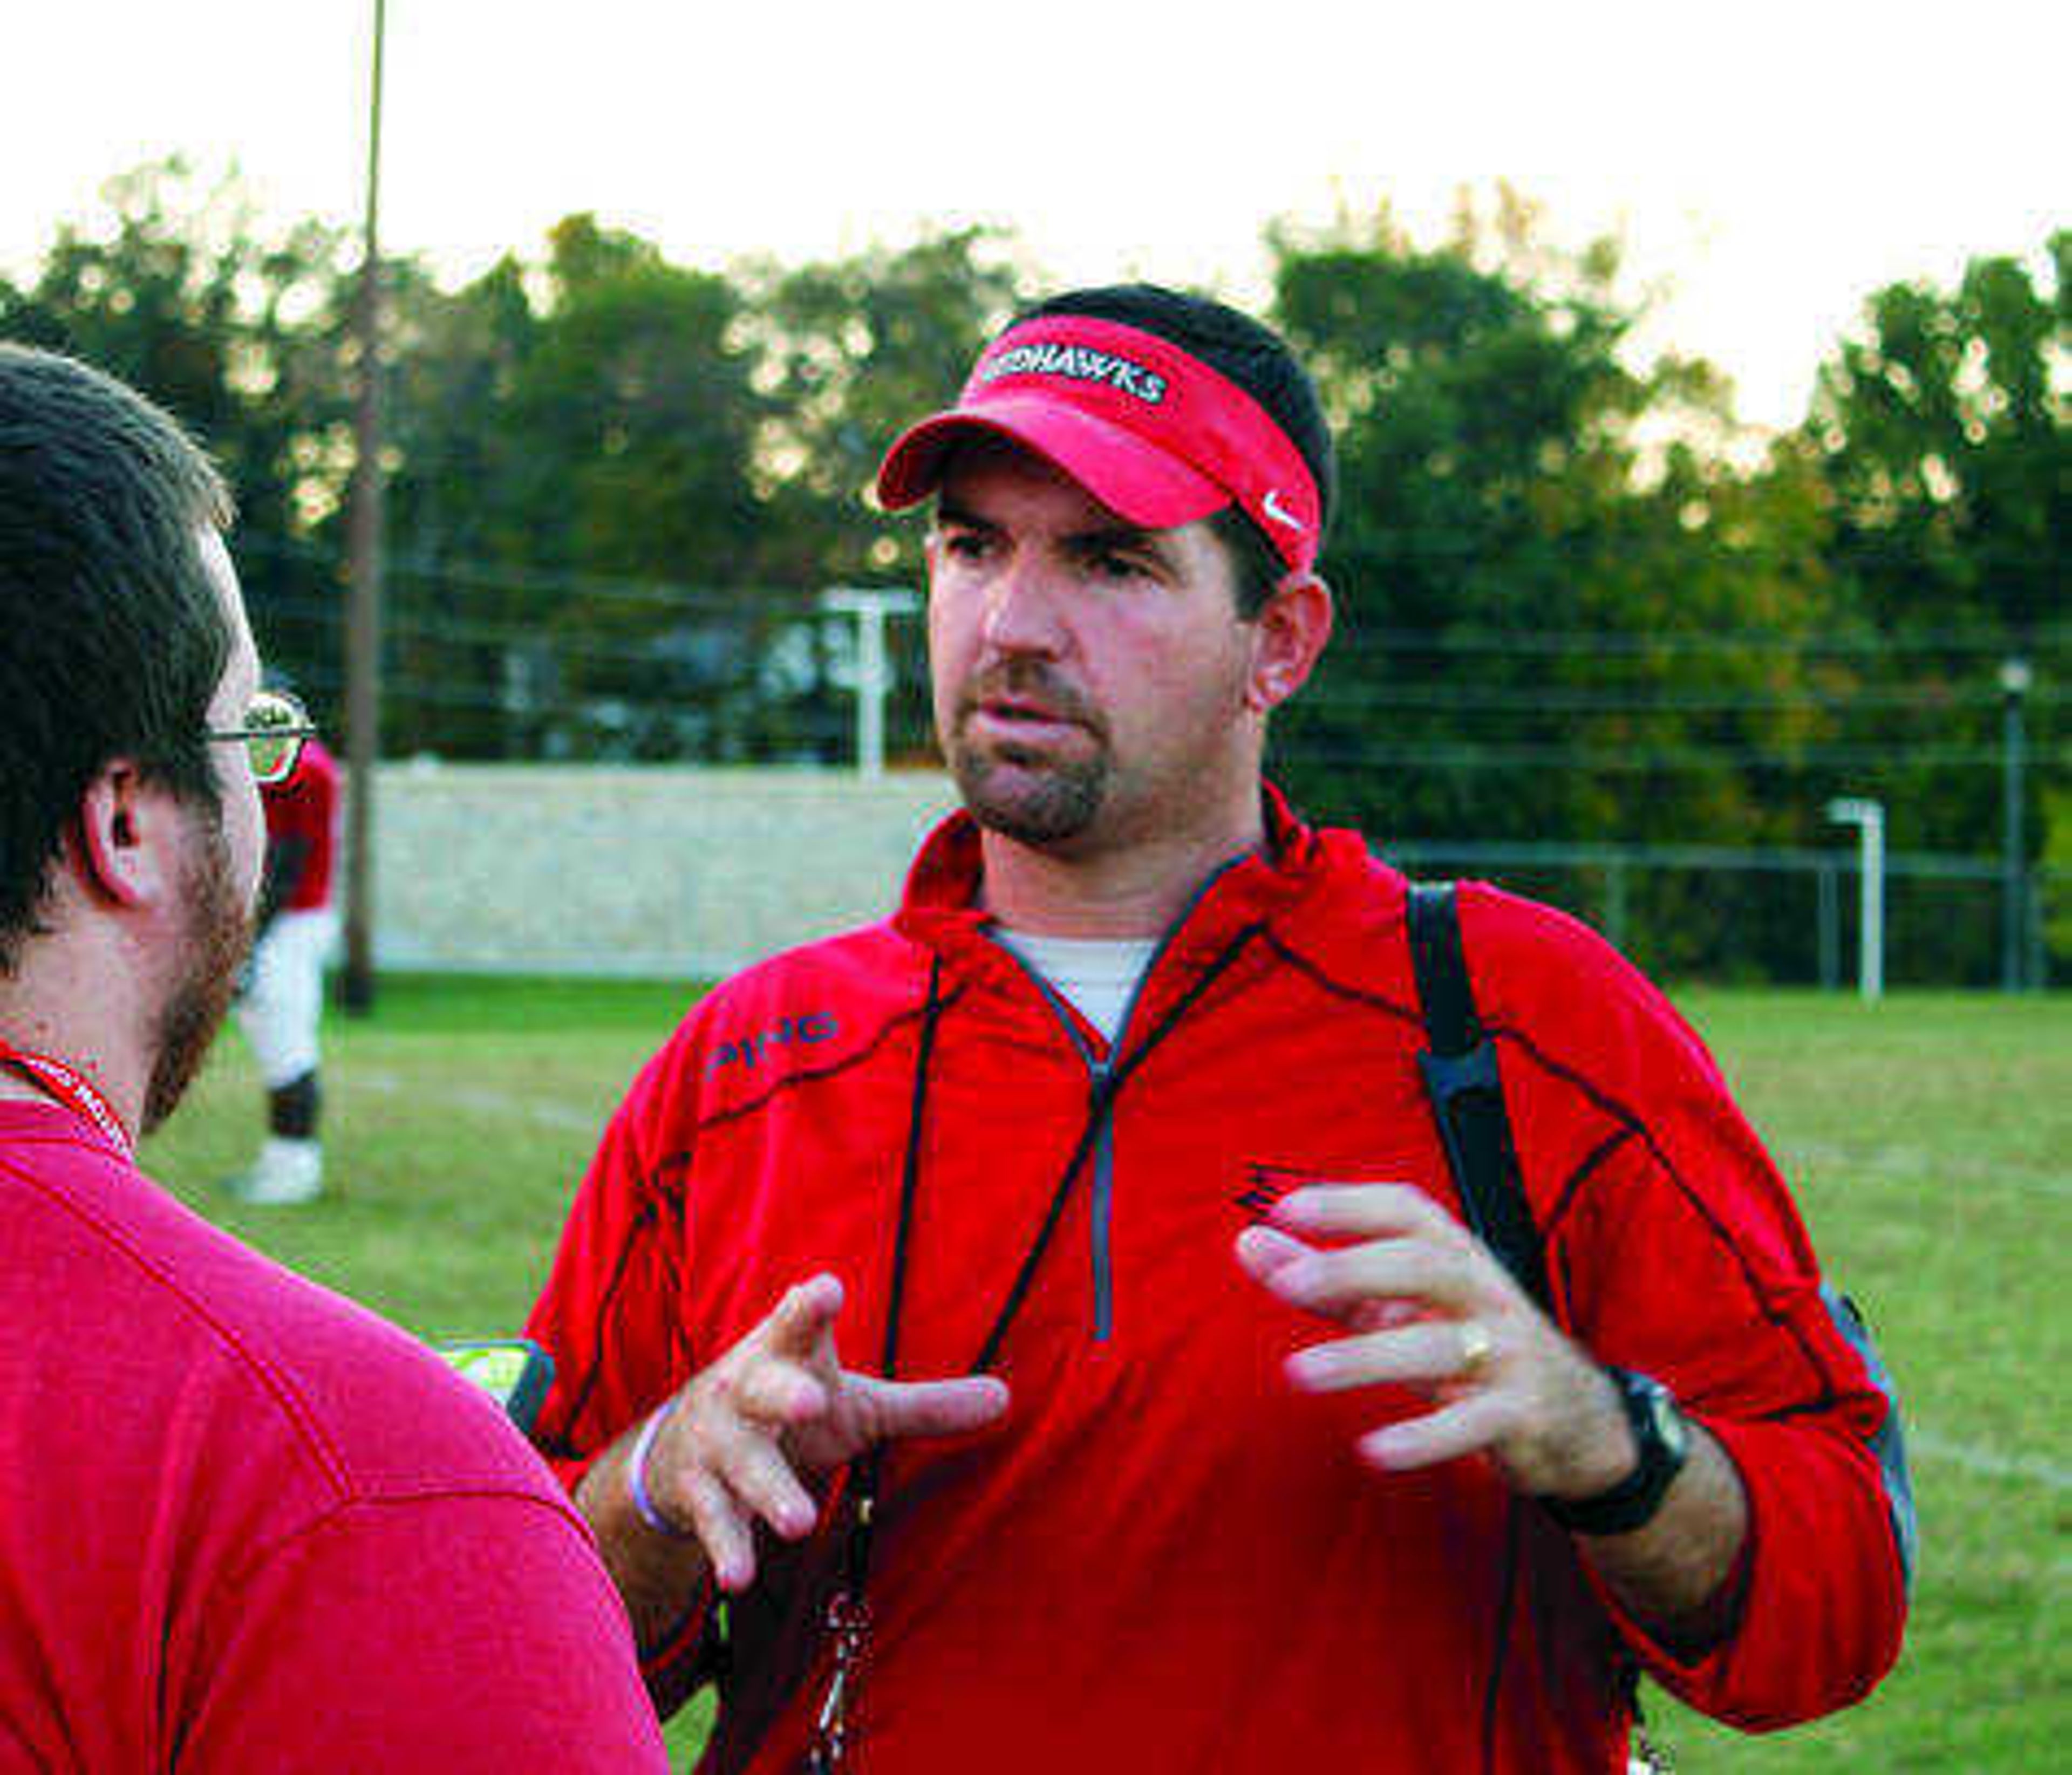 Southeast football coach Tom Matukewicz spoke to the Arrow's Sports Editor Nick McNeal about leadership and his role as a leader and role model for the university's football team. Photo by Sean Burke